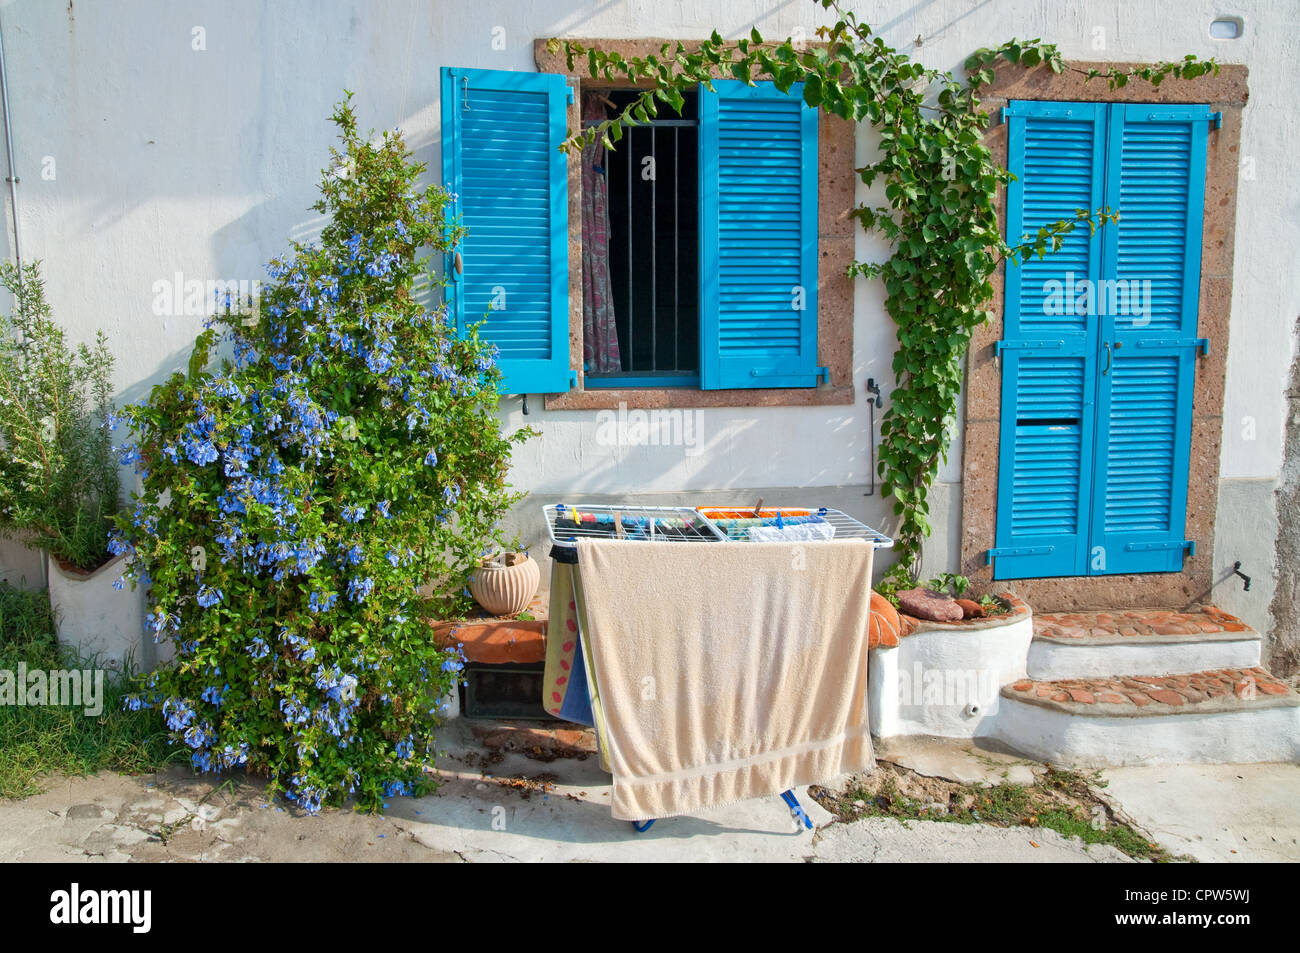 Dryer clothes in front of the Italian village house with a blue door, blue window and blue flowers Stock Photo